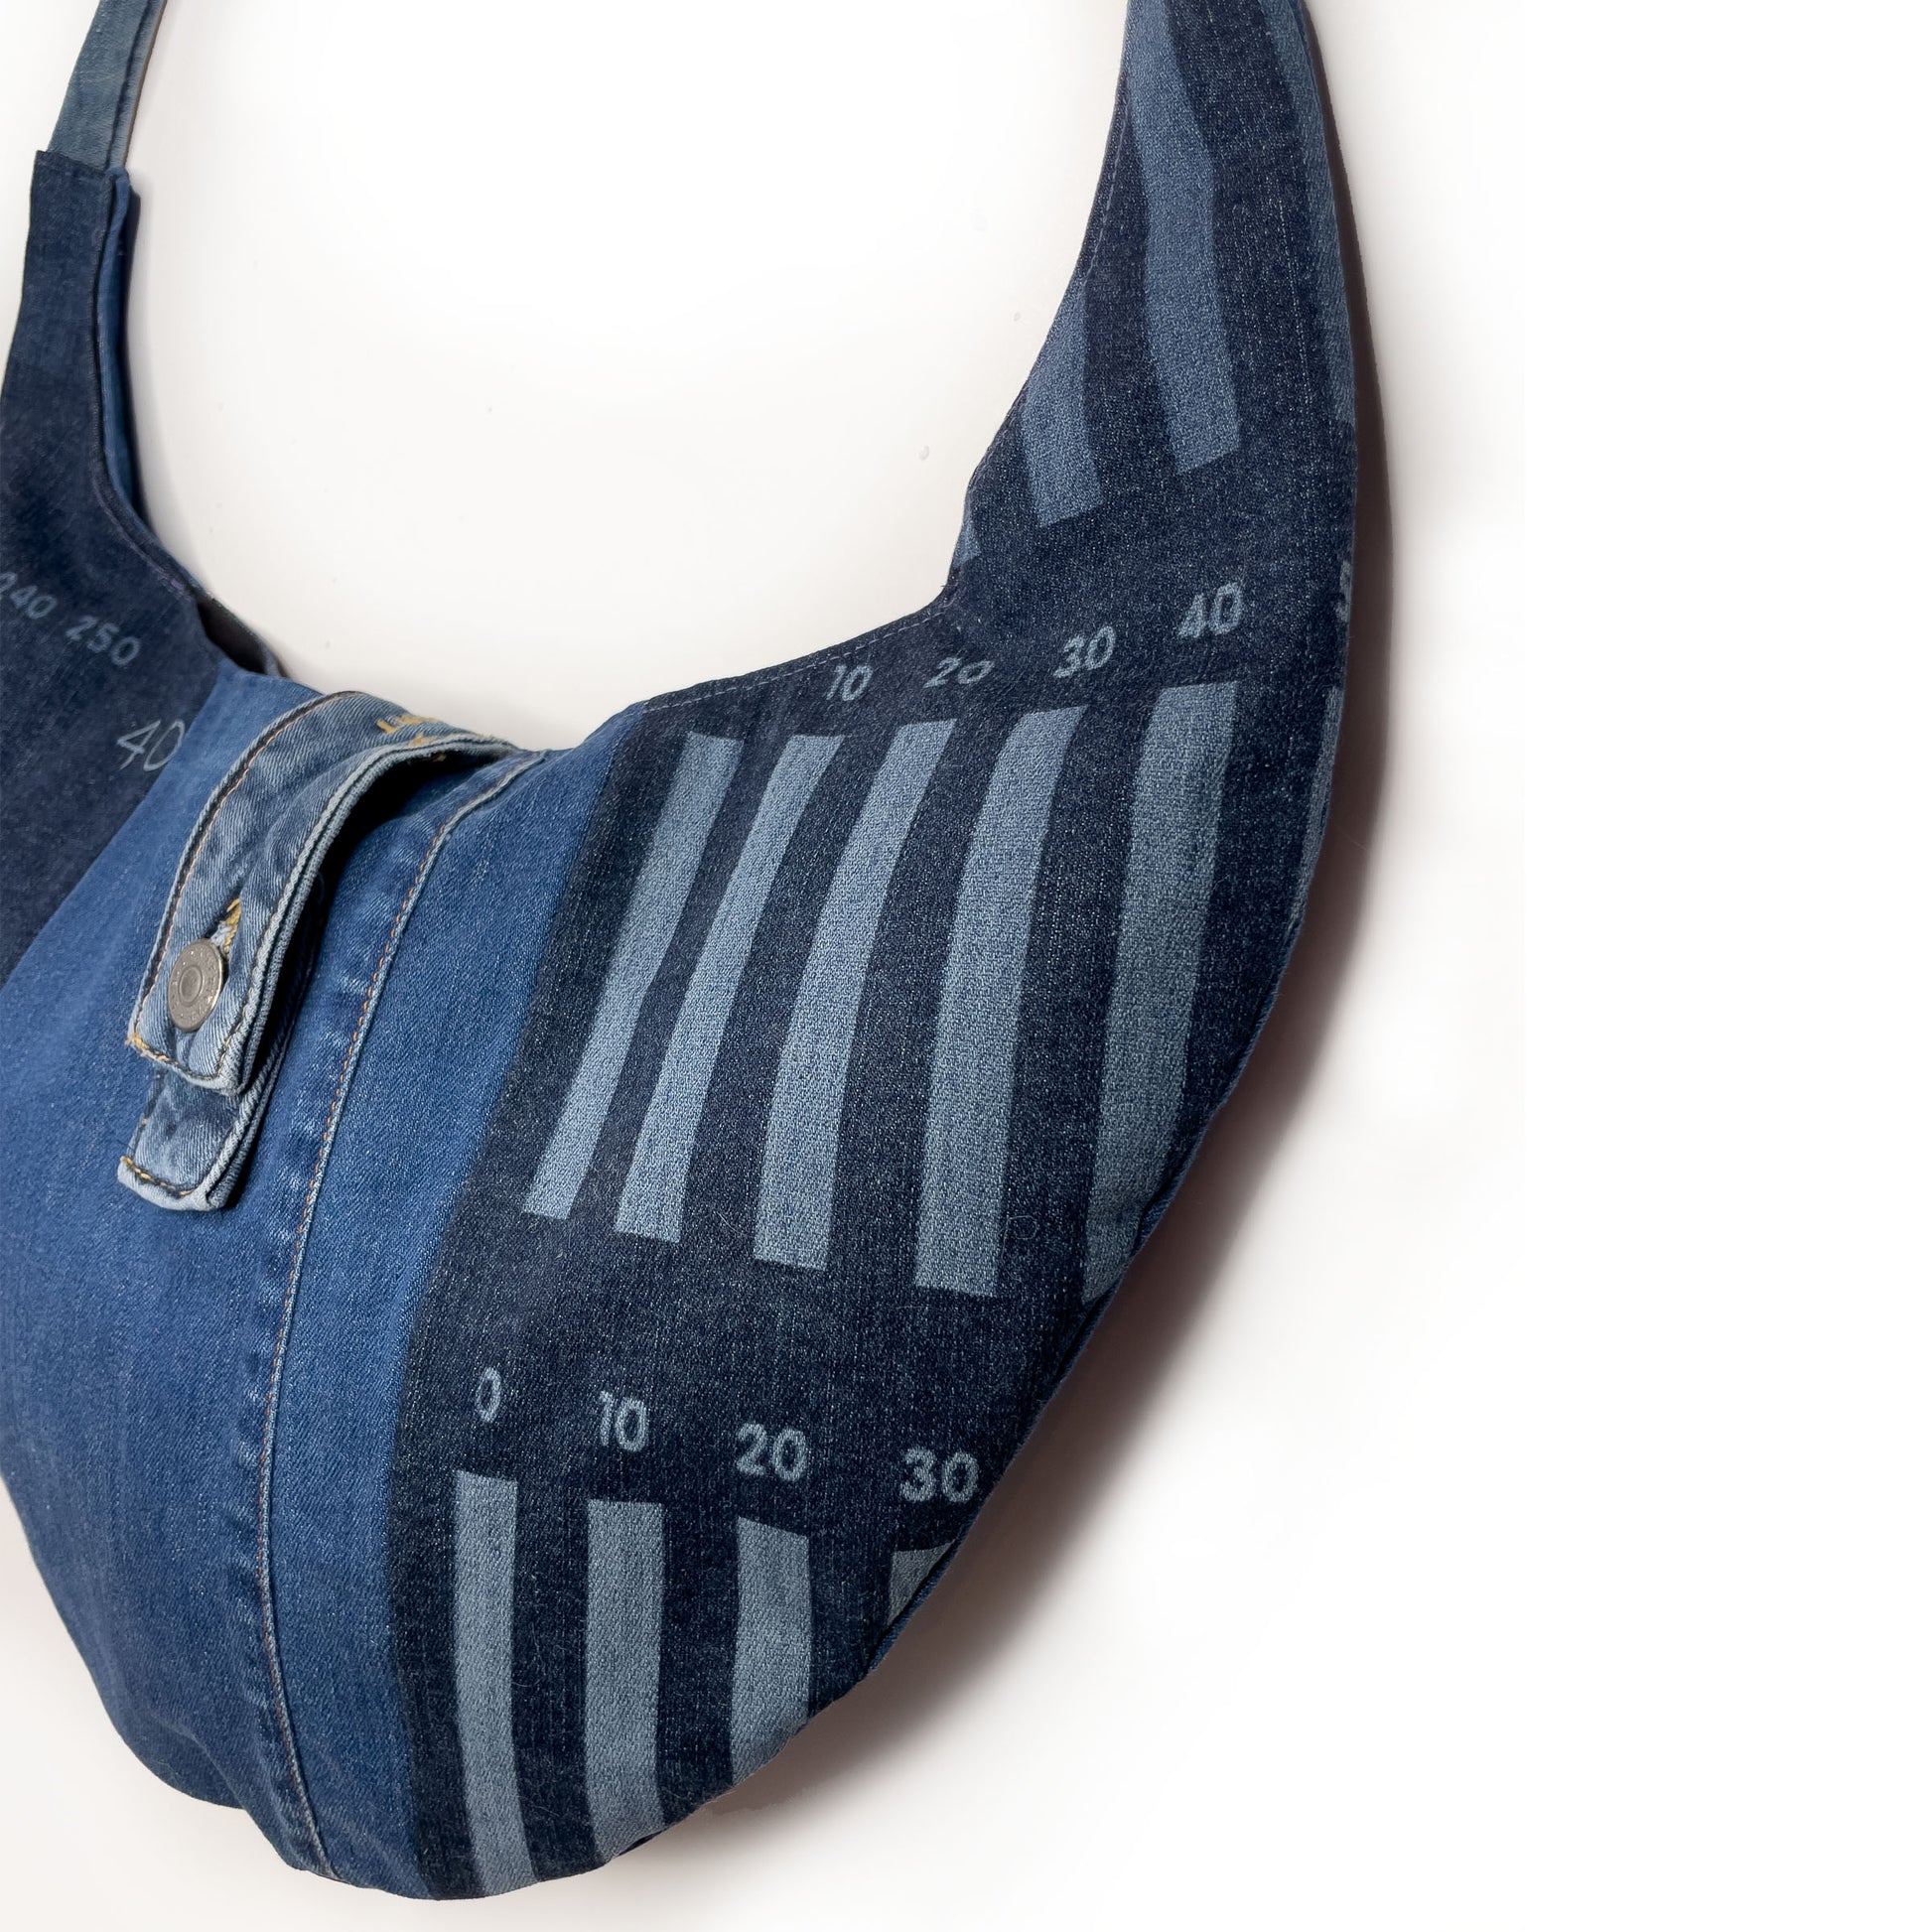 DIY RECYCLED JEANS PATCHWORK BOHO BAG, JEANS TOTE BAG